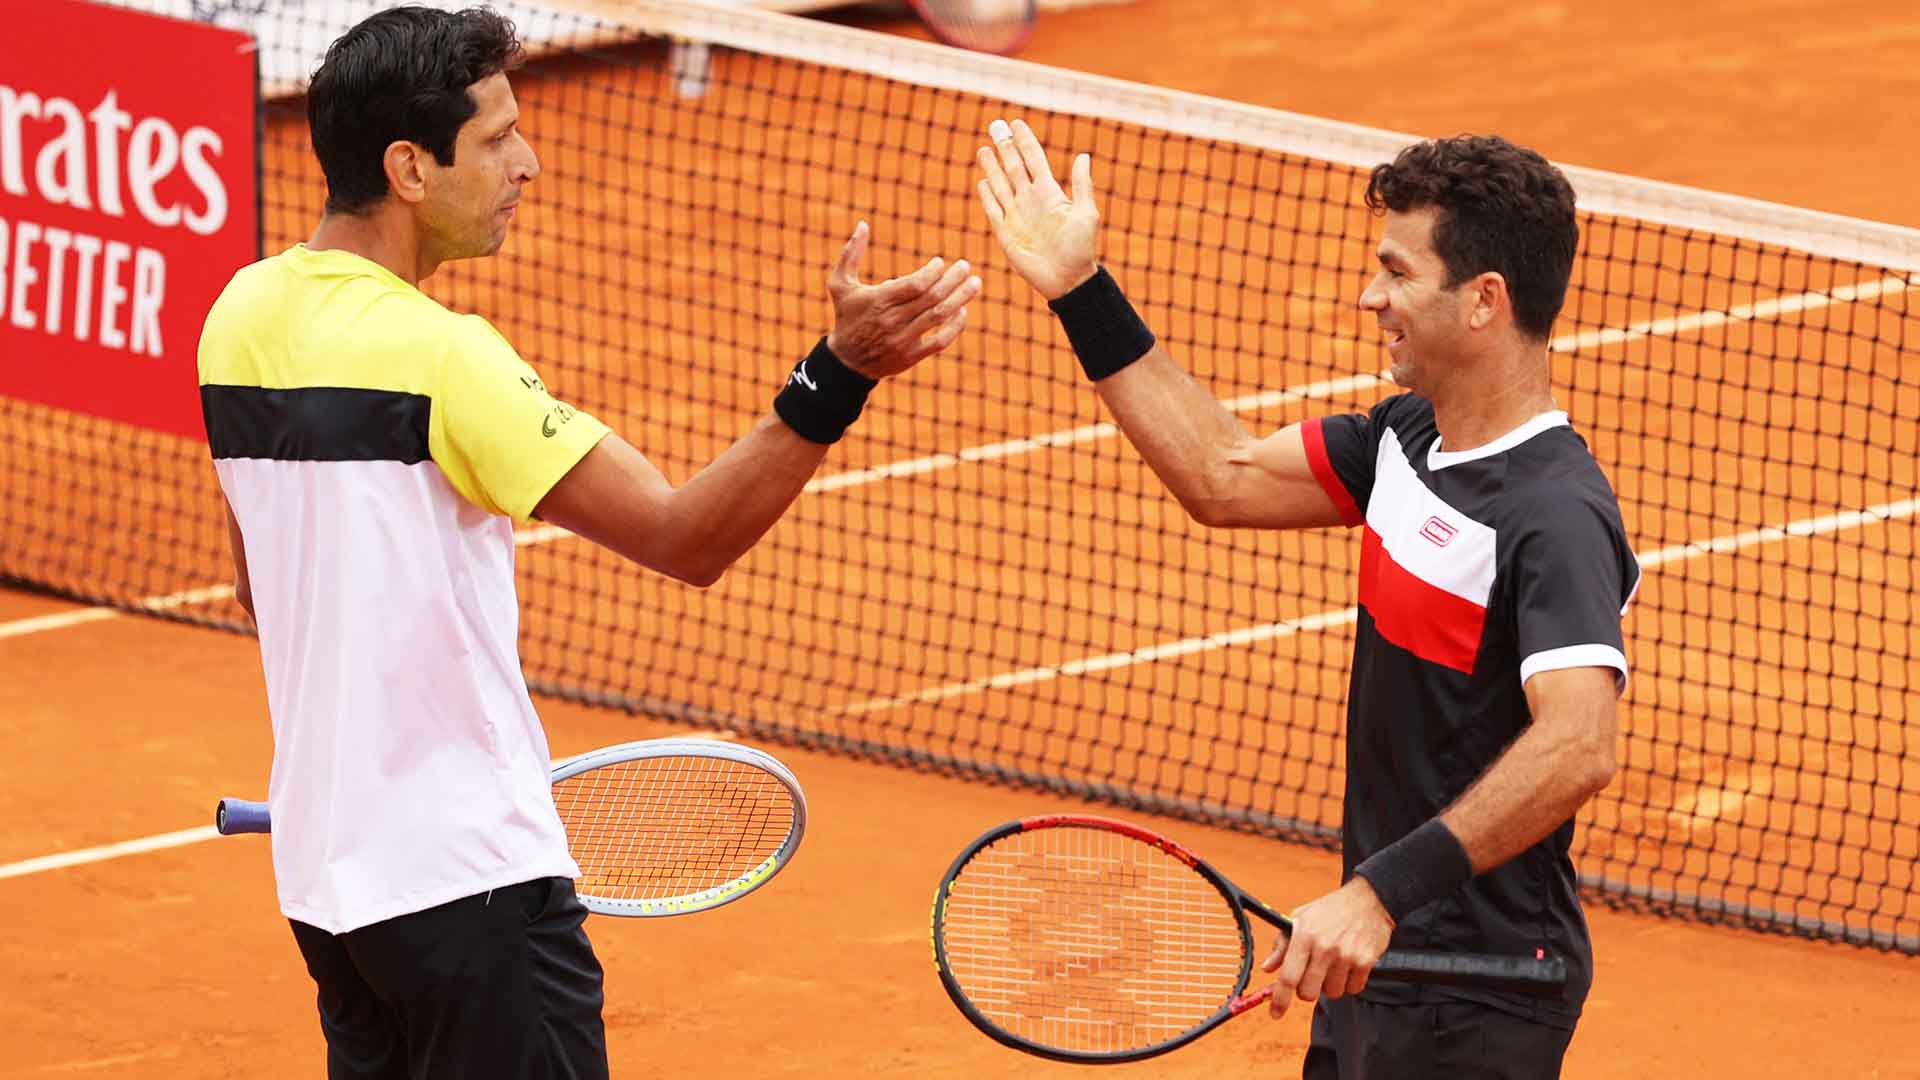 Marcelo Melo and Jean-Julien Rojer saved all seven break points they faced to beat Jamie Murray and Bruno Soares at the Mutua Madrid Open.